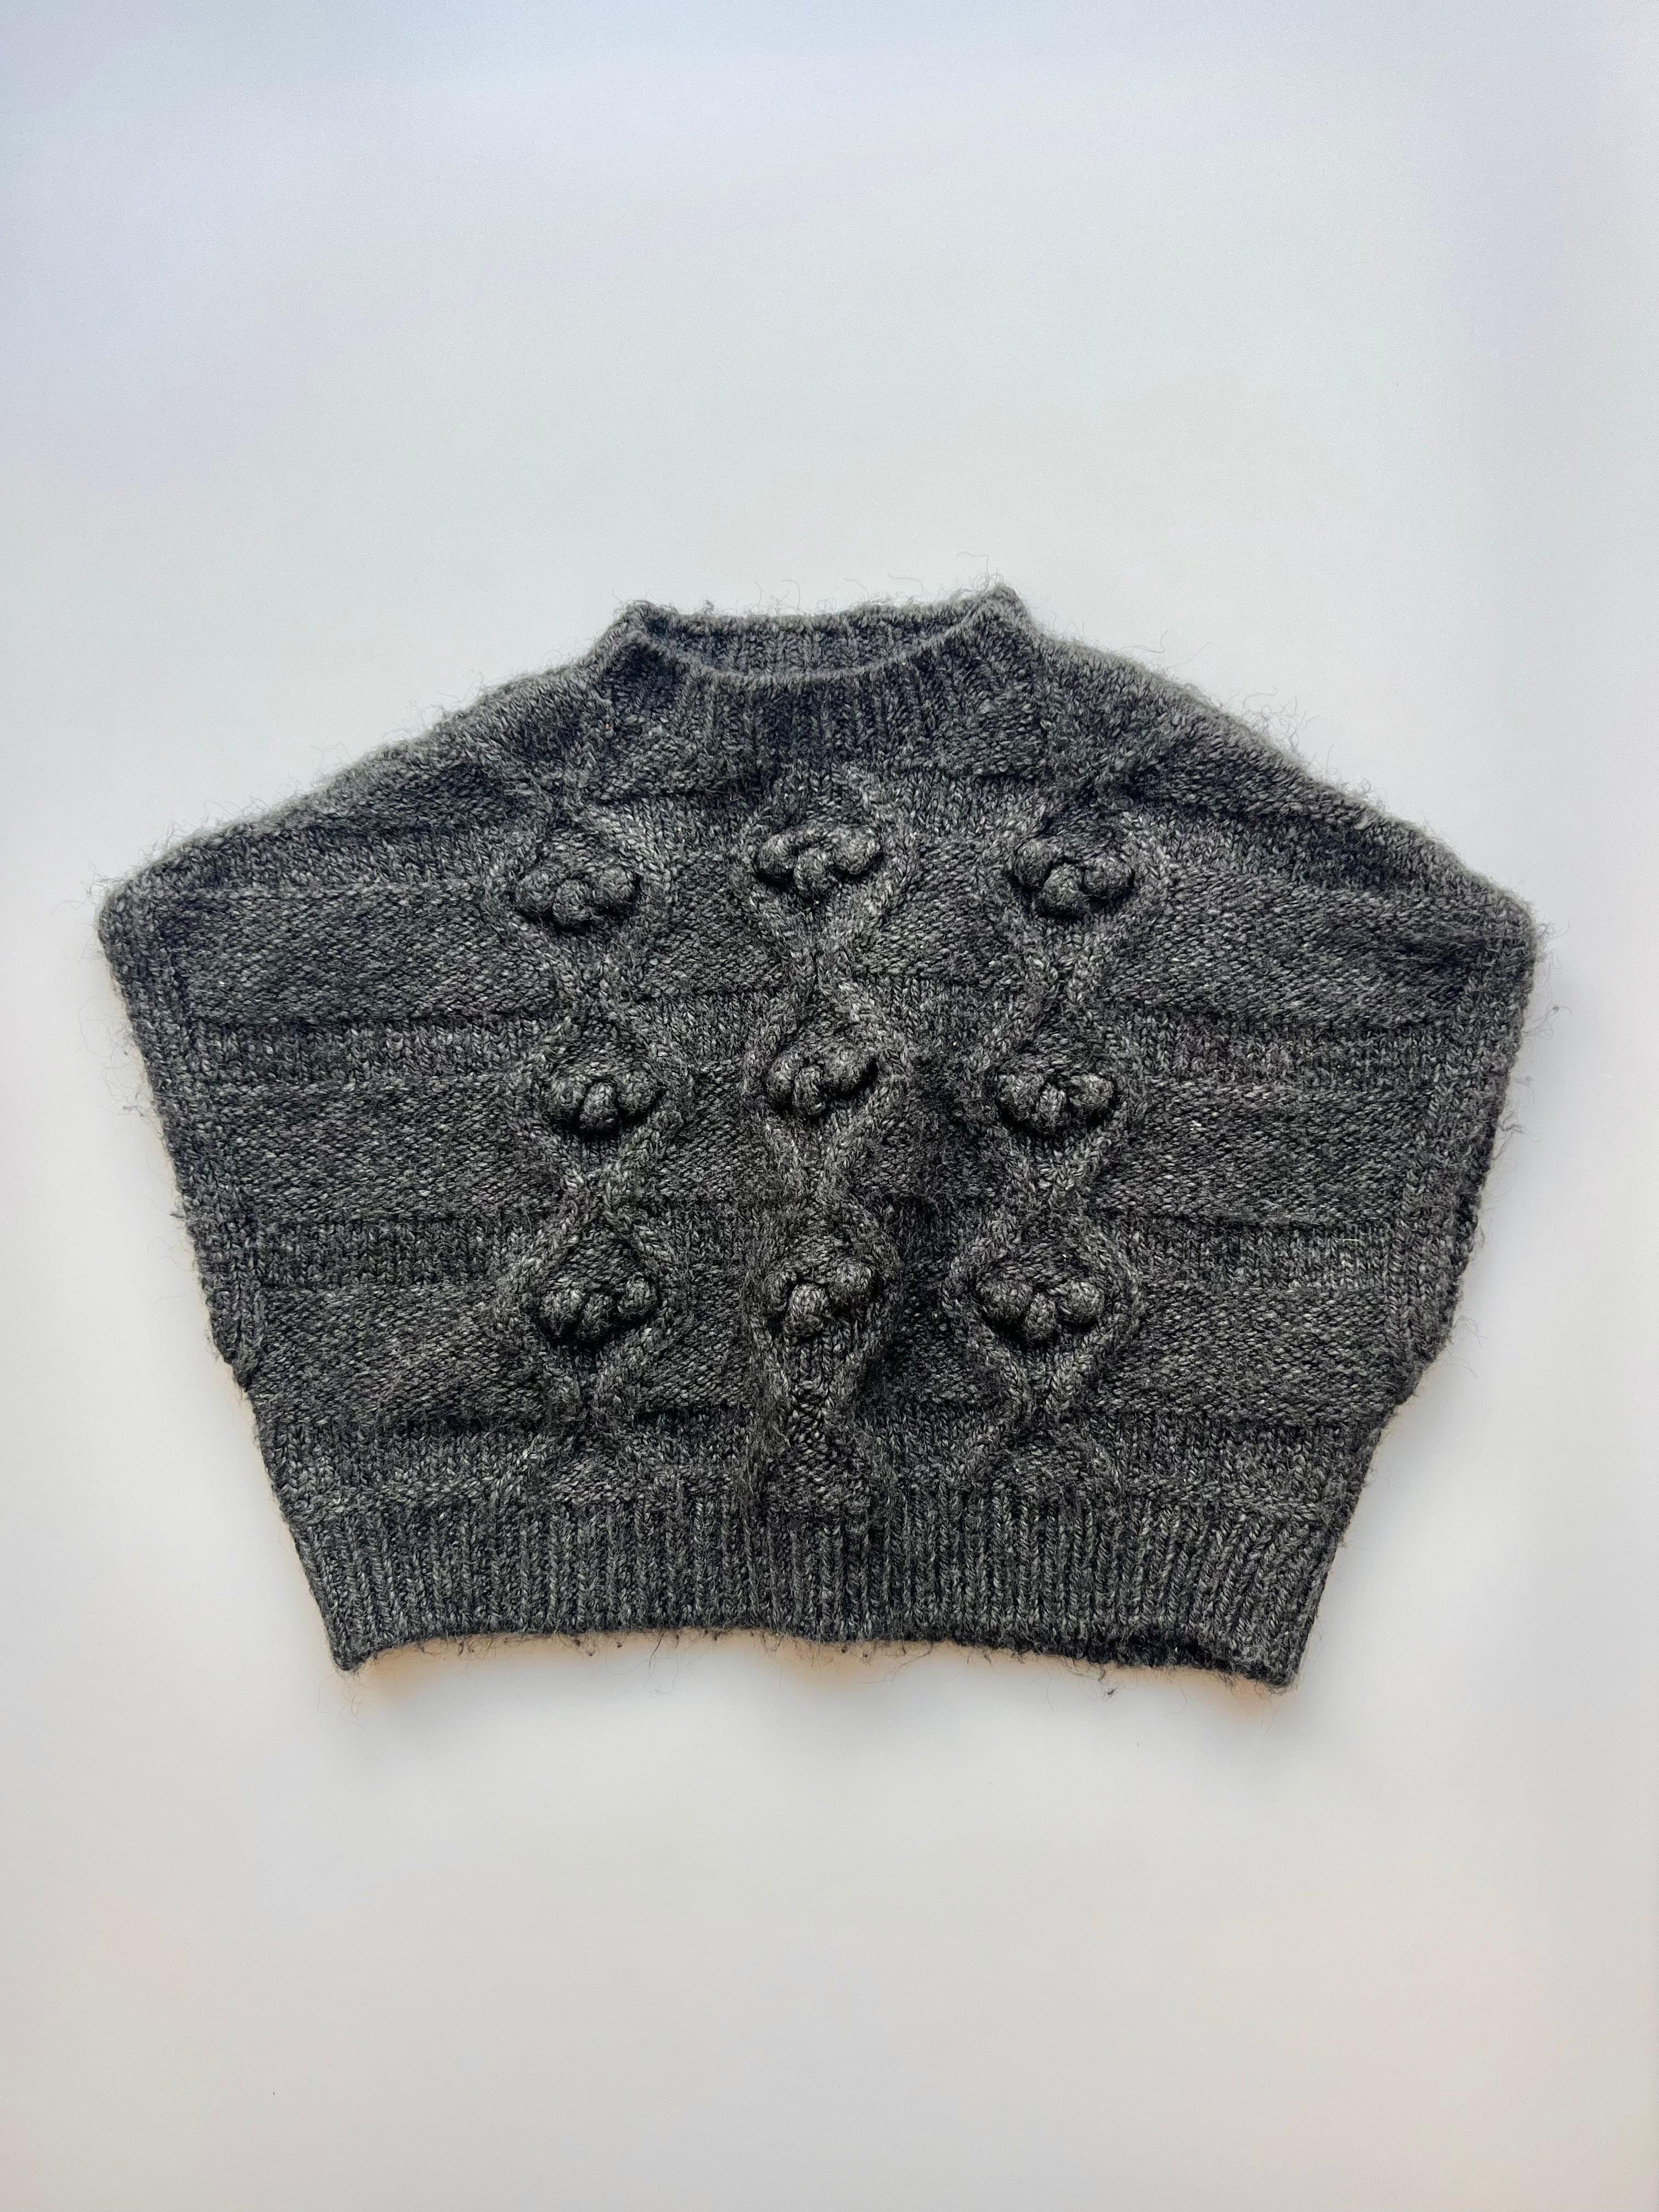 Zara Knitted Poncho 9-18 Months